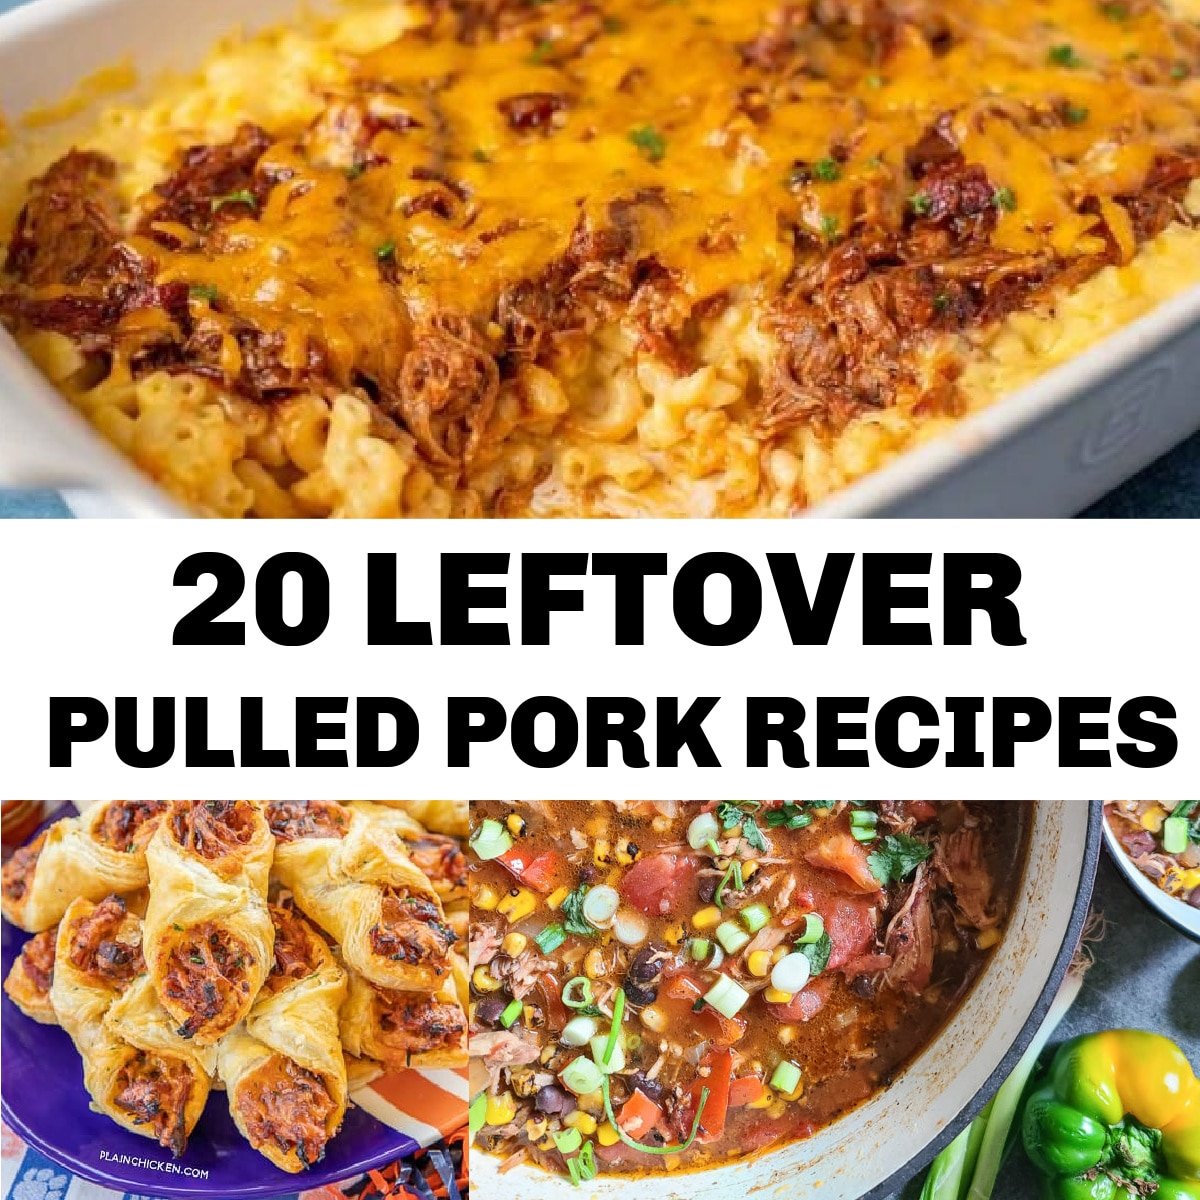 Barbecue Leftovers - How to Store, Reheat, and Recipes